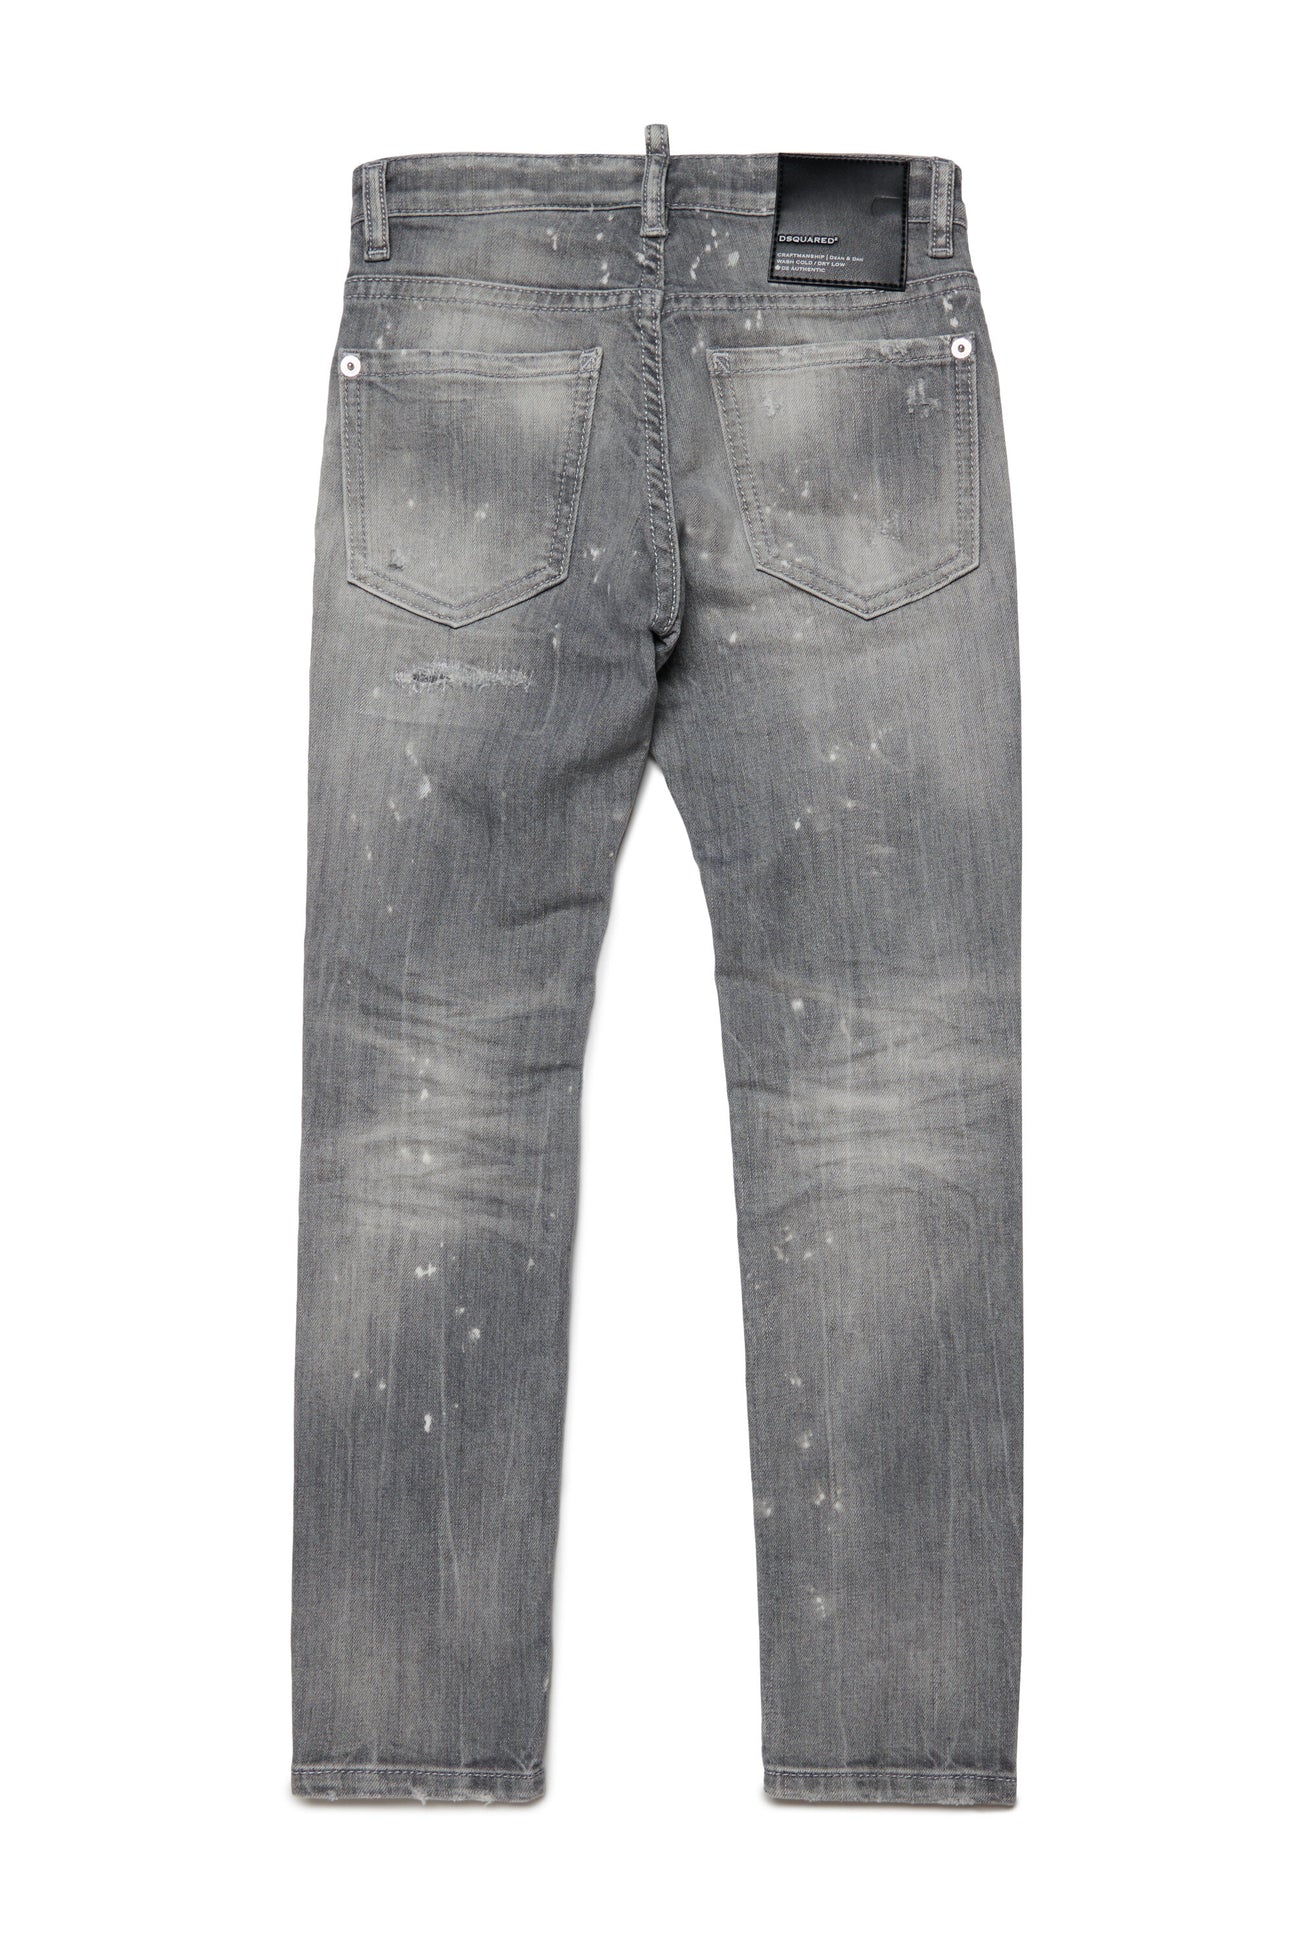 Speckled gray skinny jeans - Cool Guy Speckled gray skinny jeans - Cool Guy